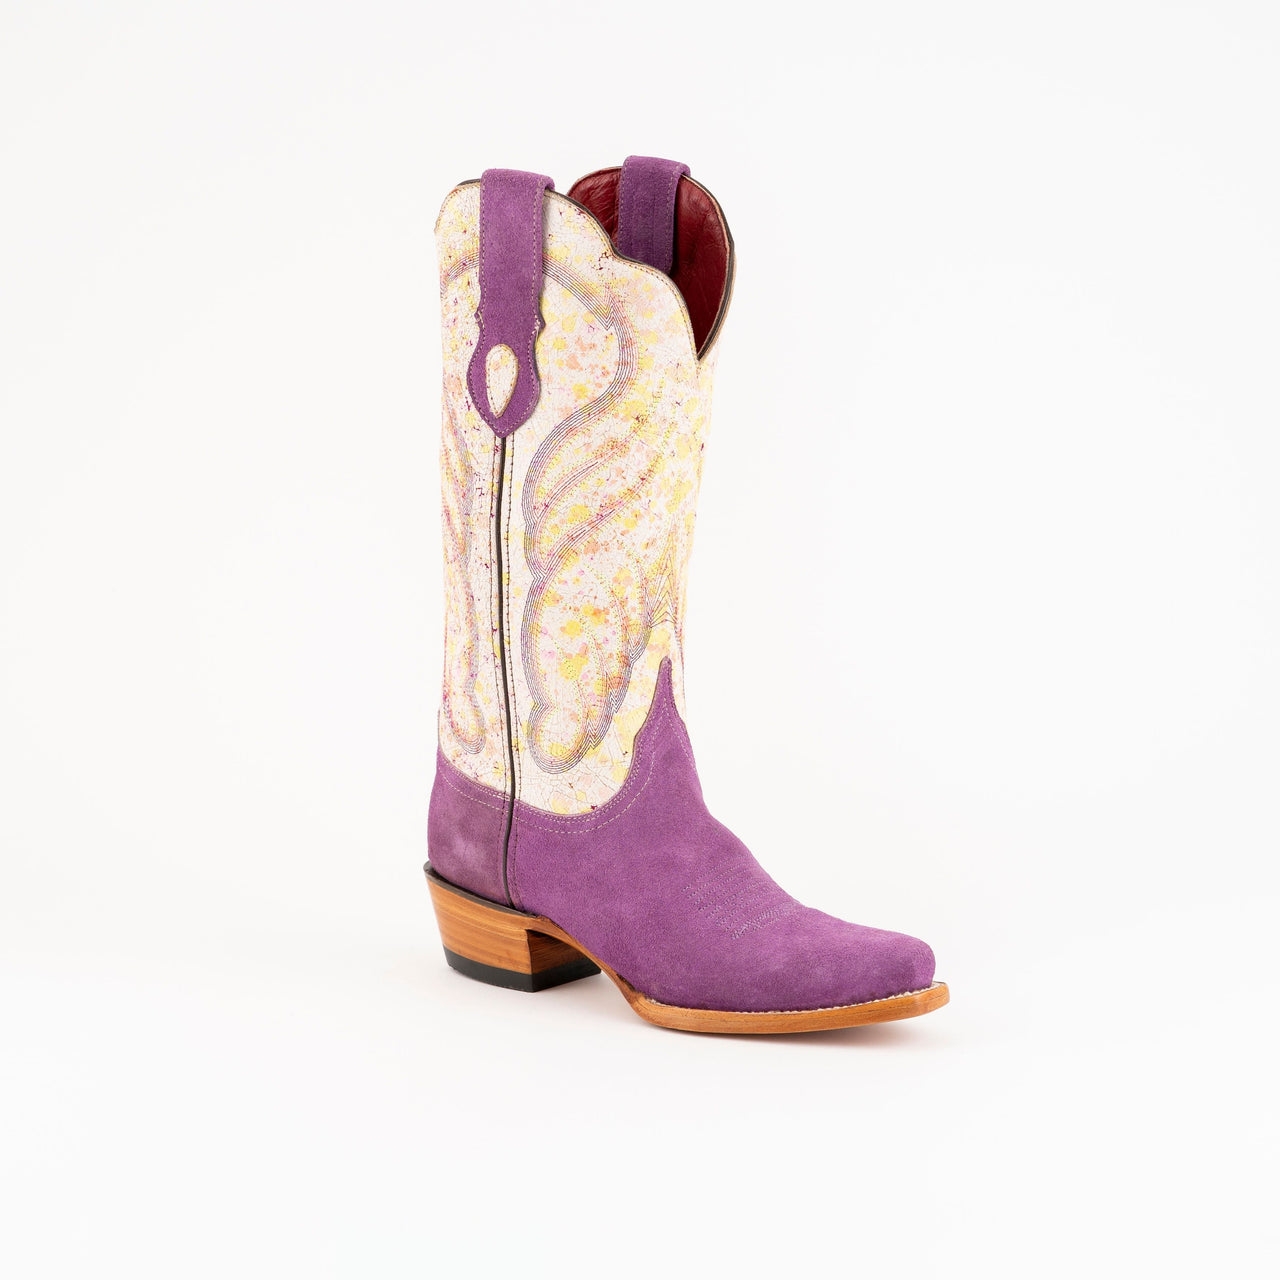 Women's Ferrini Candy Leather Boots Handcrafted Purple - yeehawcowboy